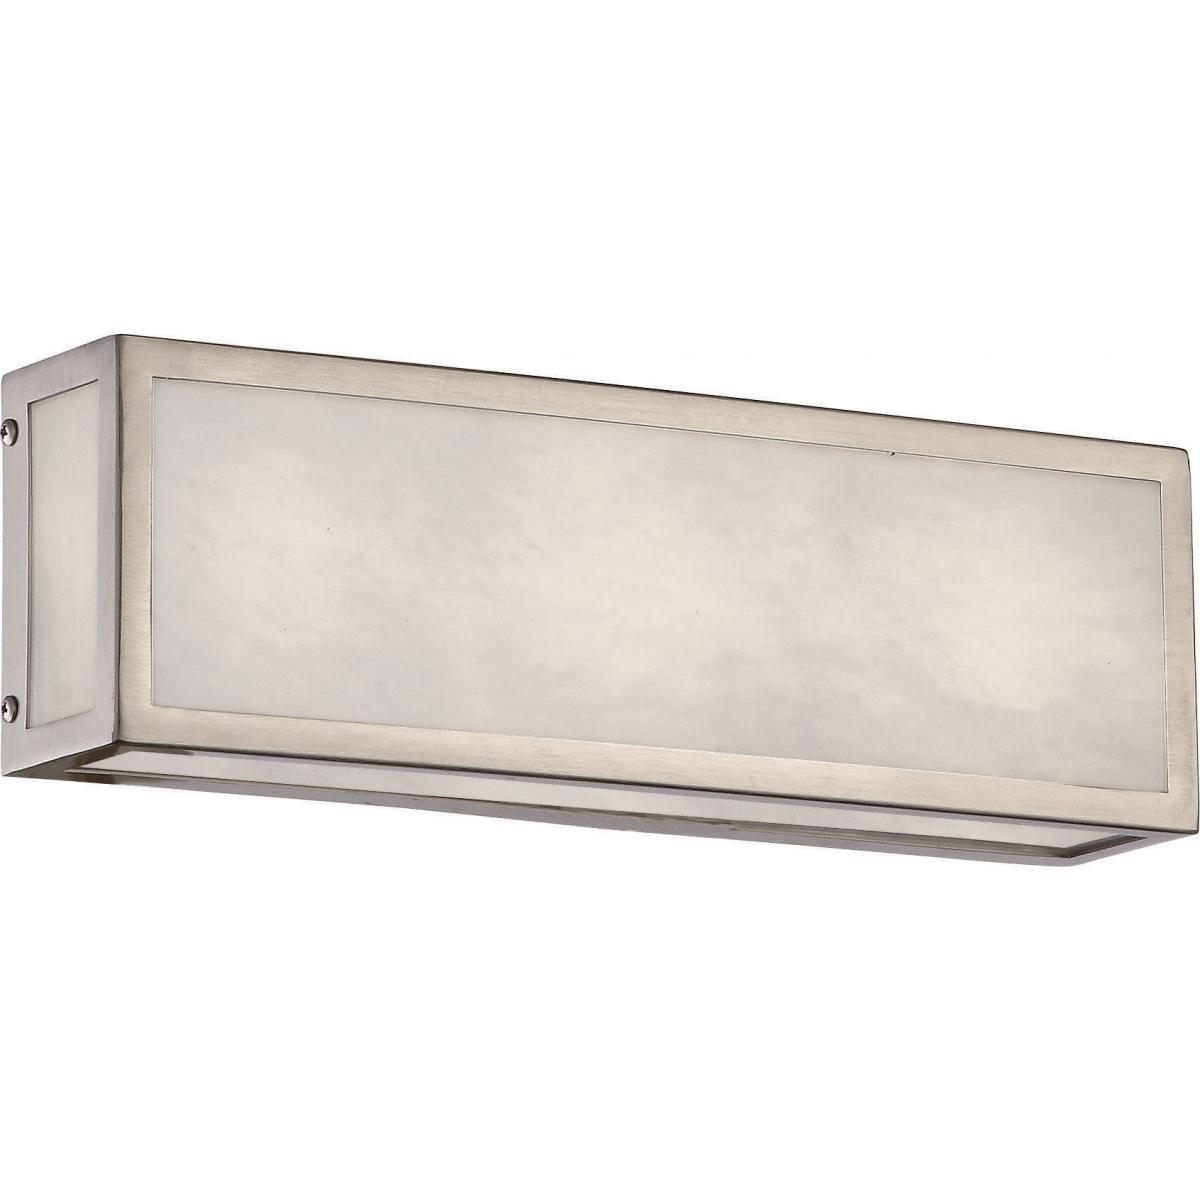 Crate 12 in. LED Vanity Light 3000K Silver Finish - Bees Lighting